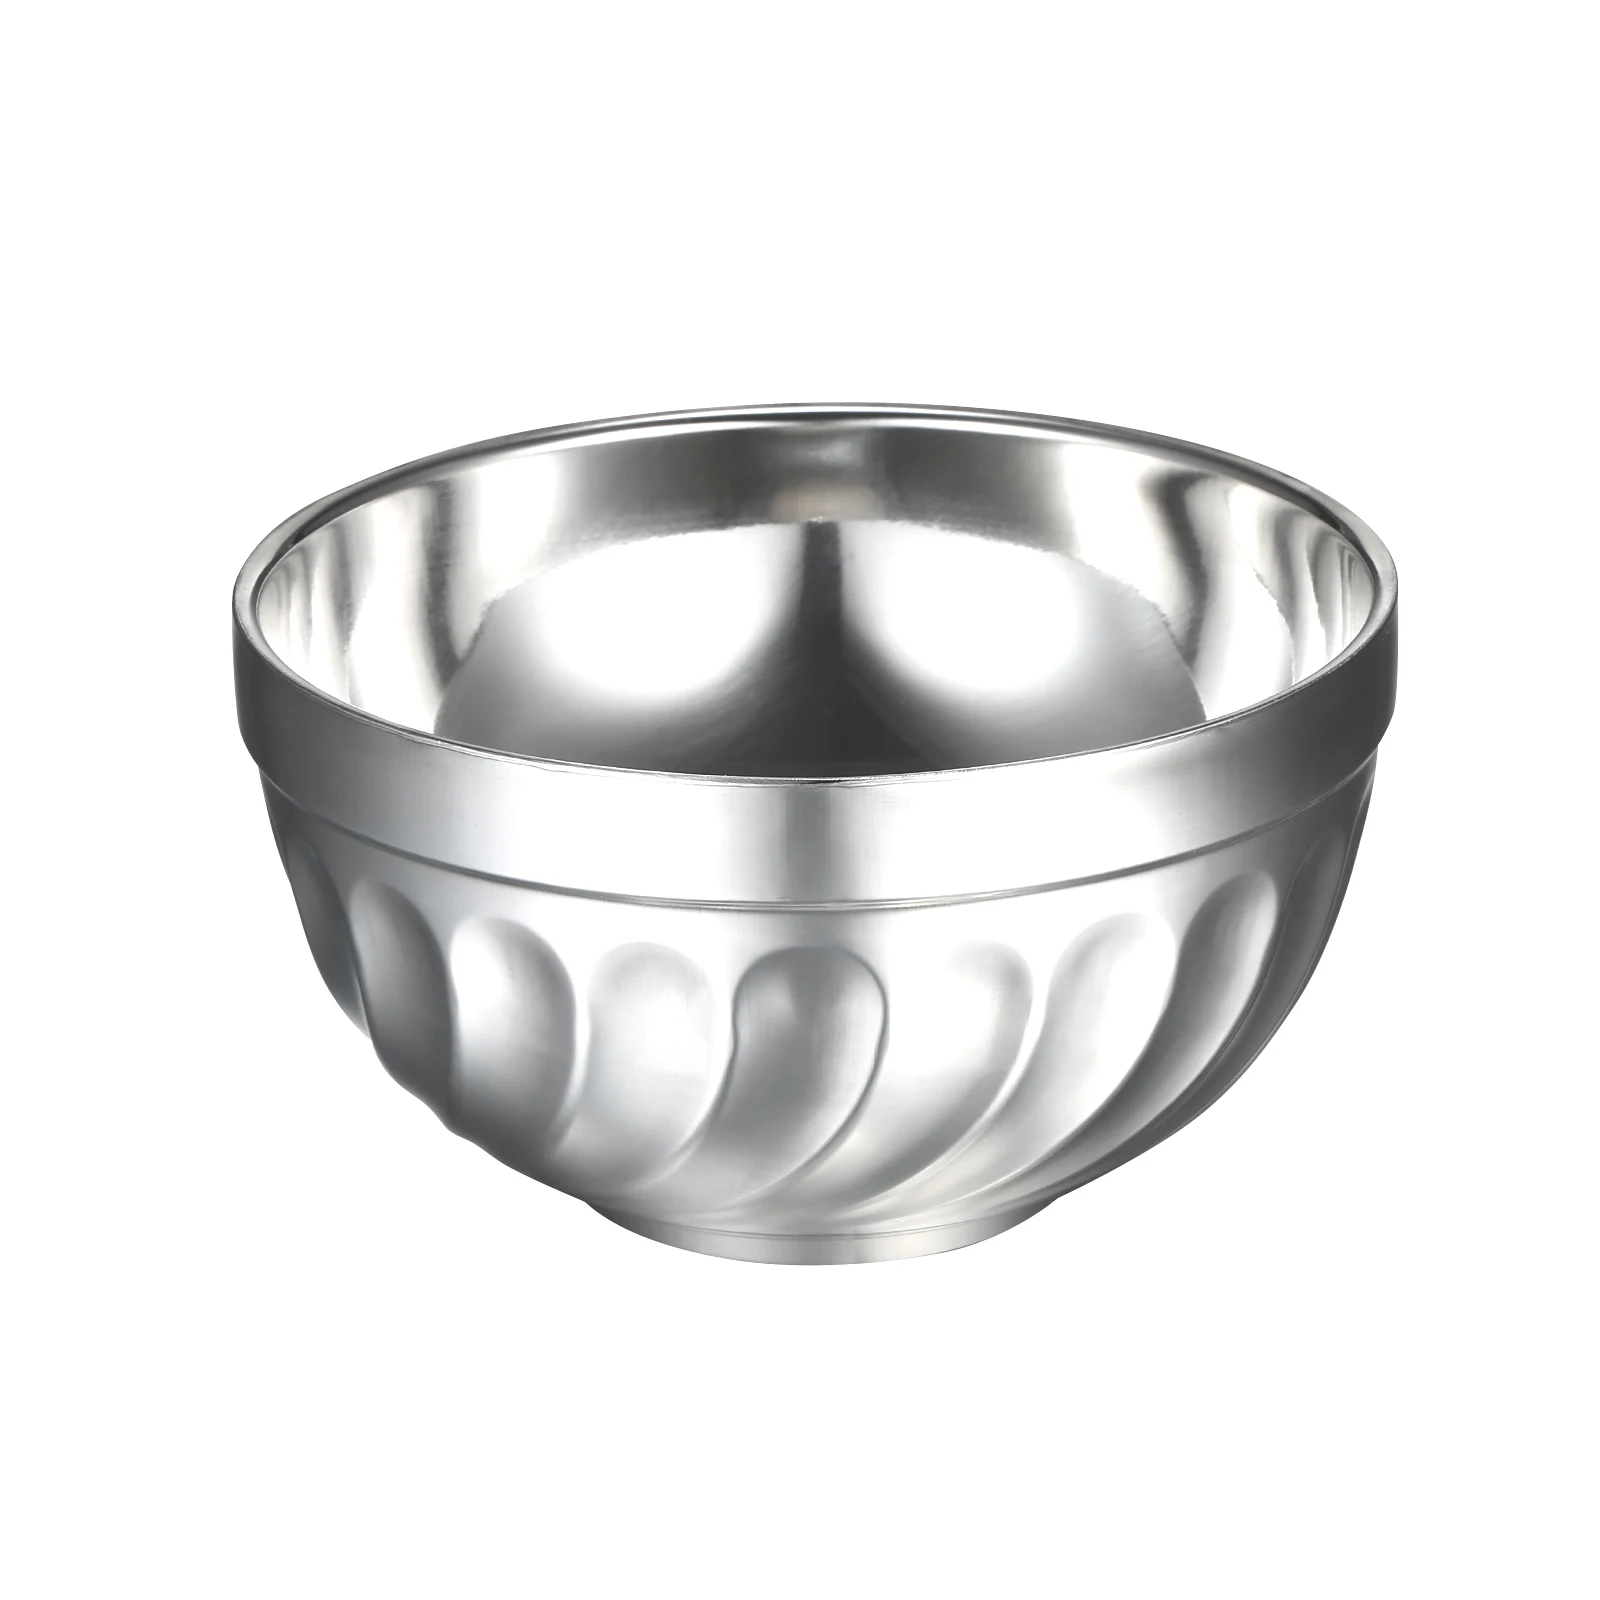 https://ae01.alicdn.com/kf/Hb67578651d224861bf31a838796e3c57B/Stainless-Steel-Bowl-Anti-Scald-Double-Walled-Thermal-Insulation-Bowl-Non-Slip-Soup-Bowls-Anti-Breakage.jpg